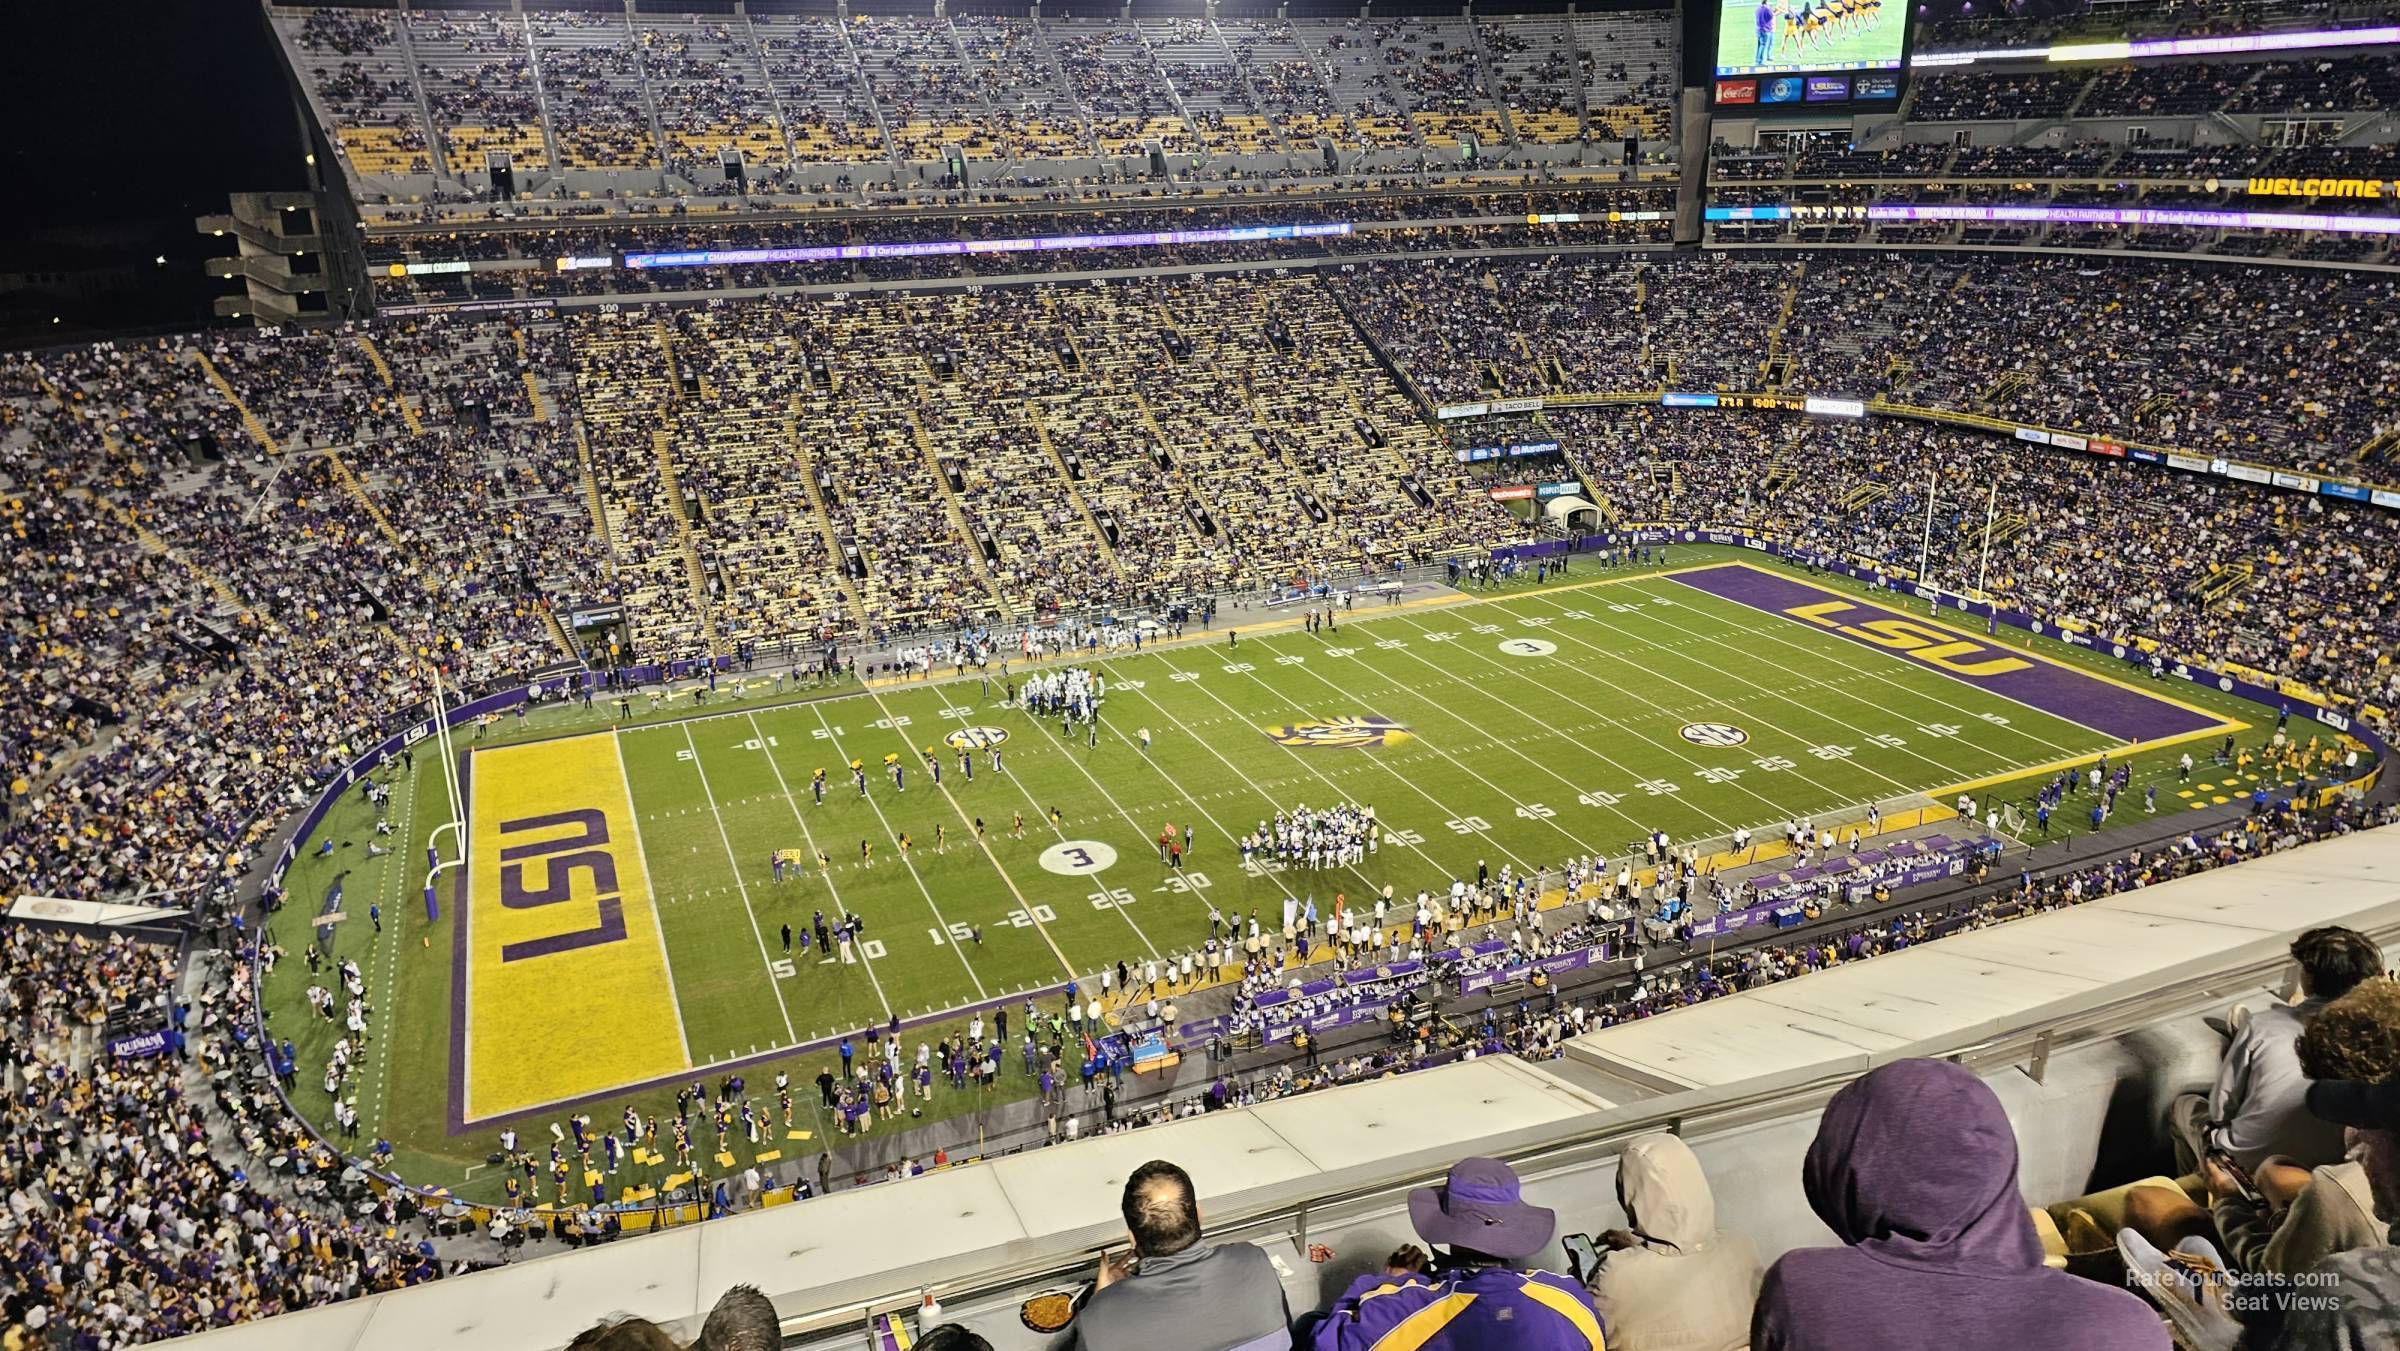 section 519, row 4 seat view  - tiger stadium